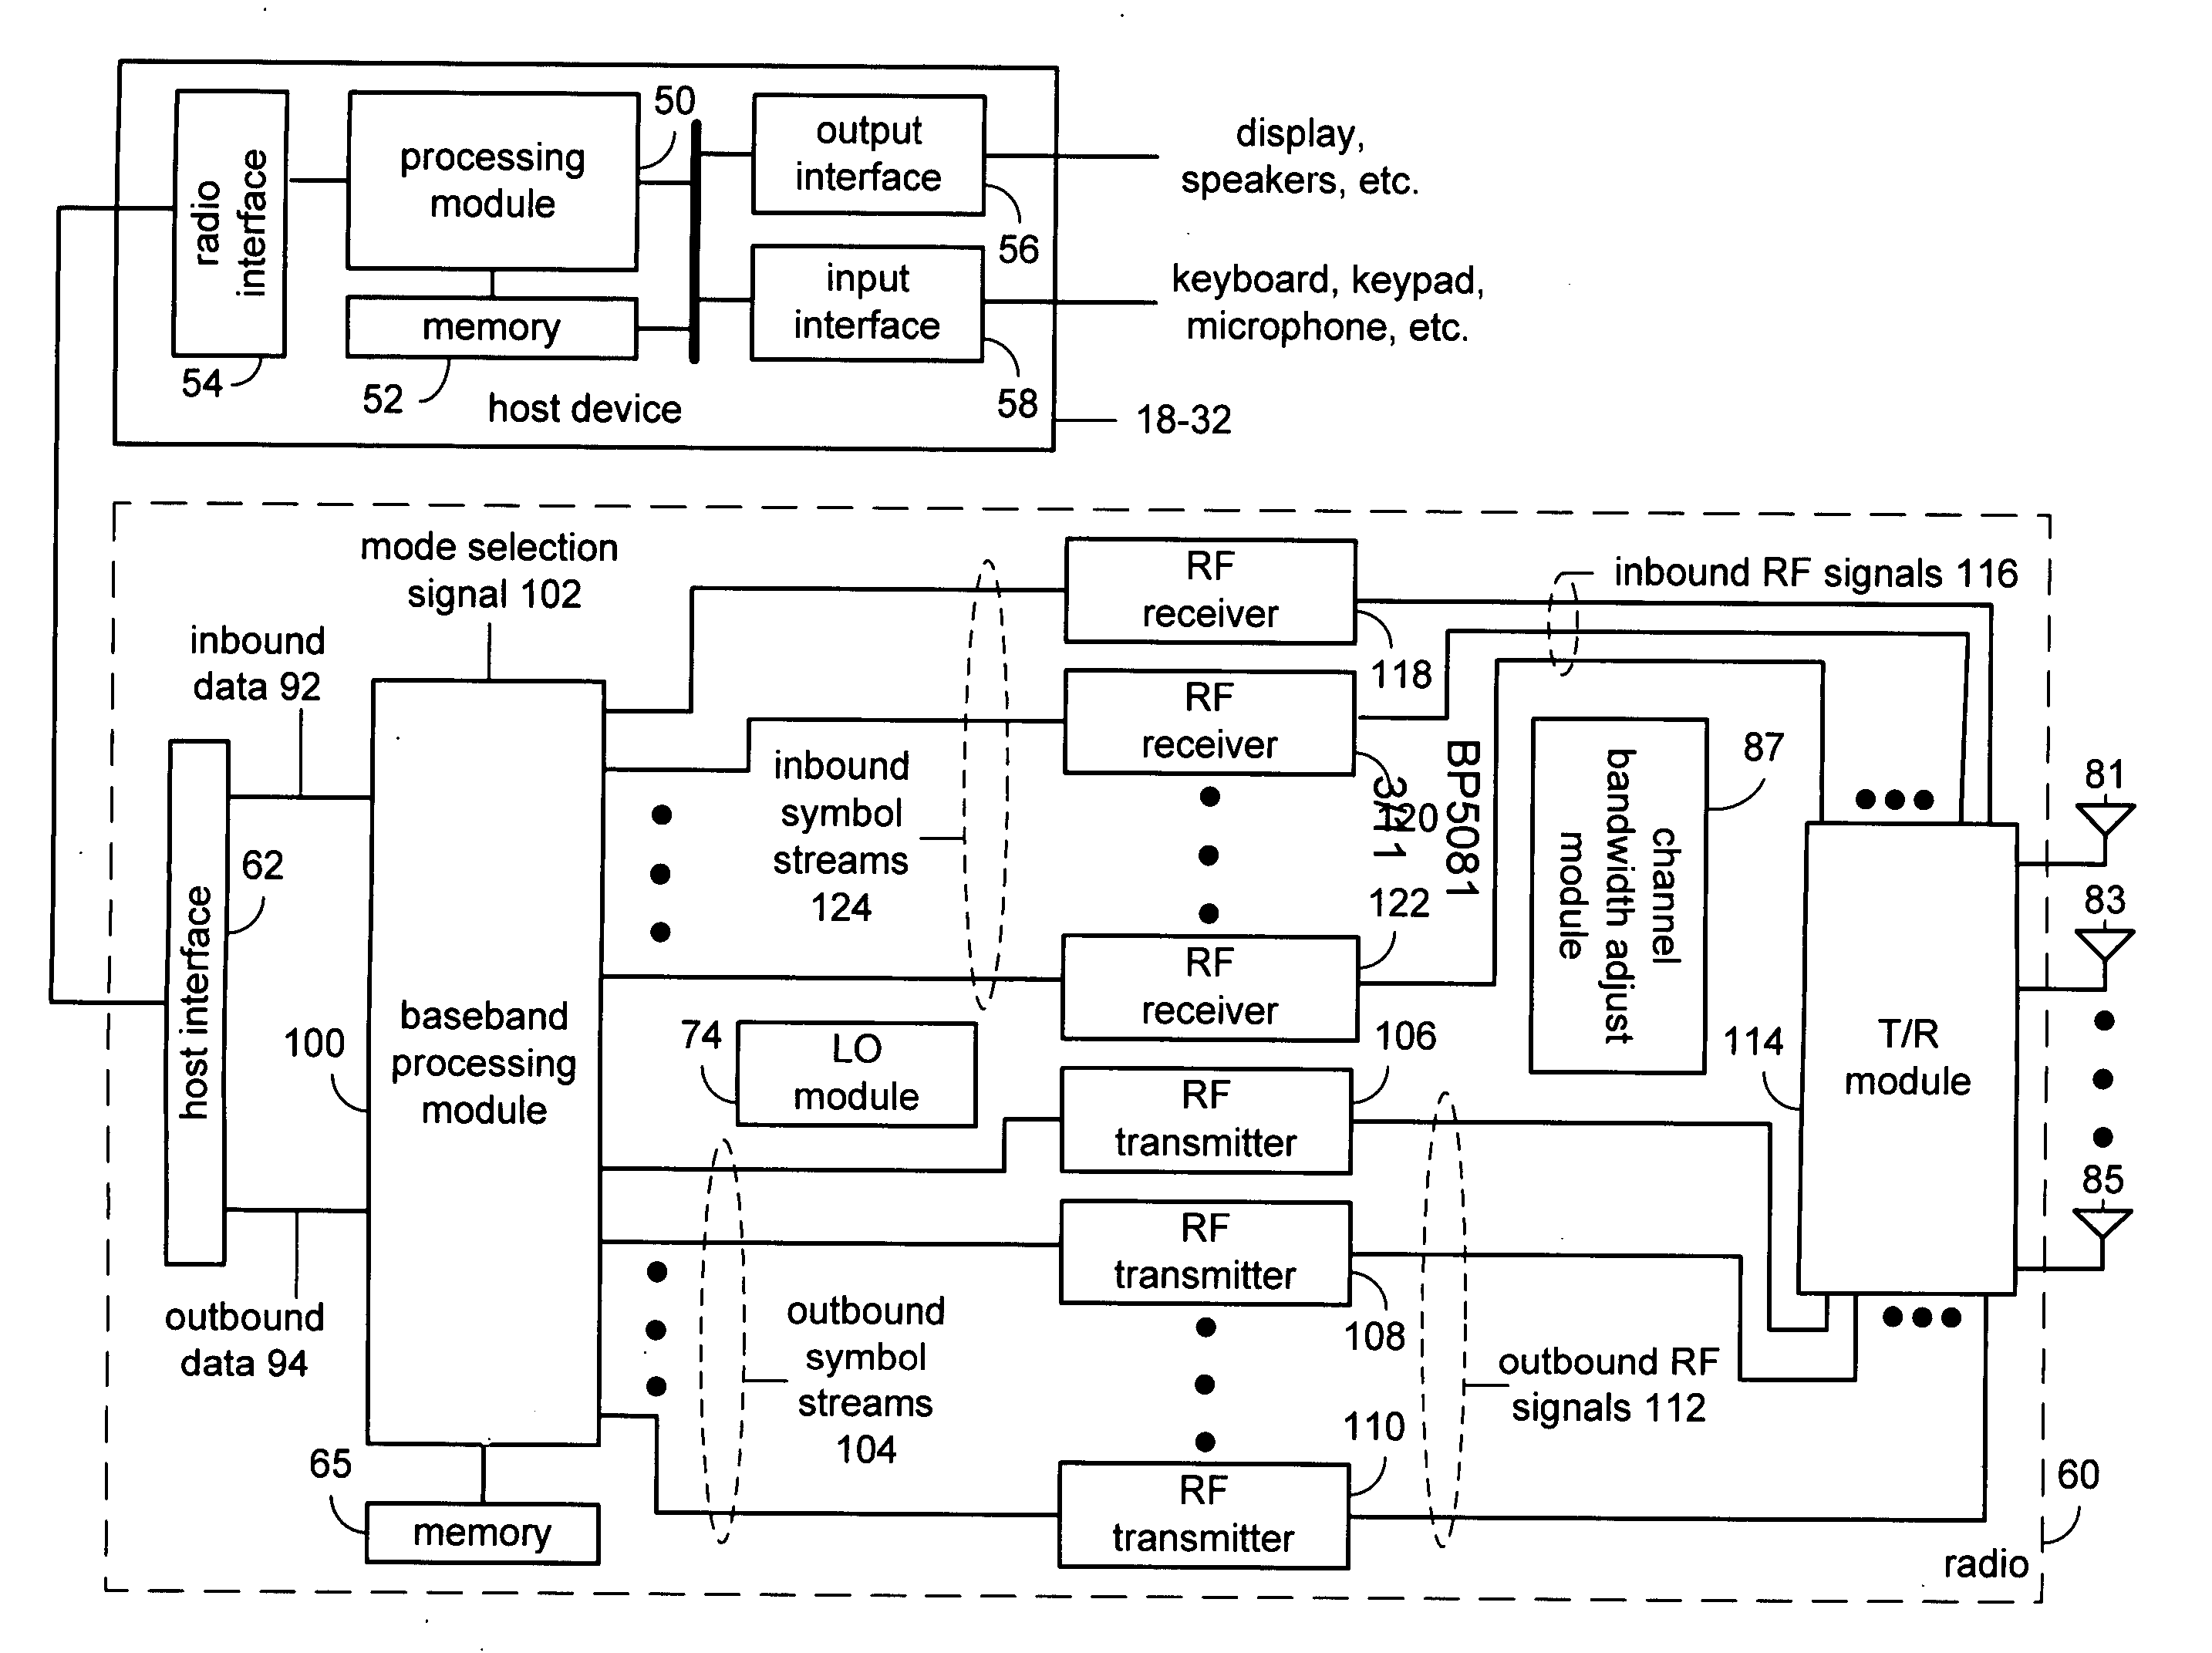 Feedback of channel information in a closed loop beamforming wireless communication system